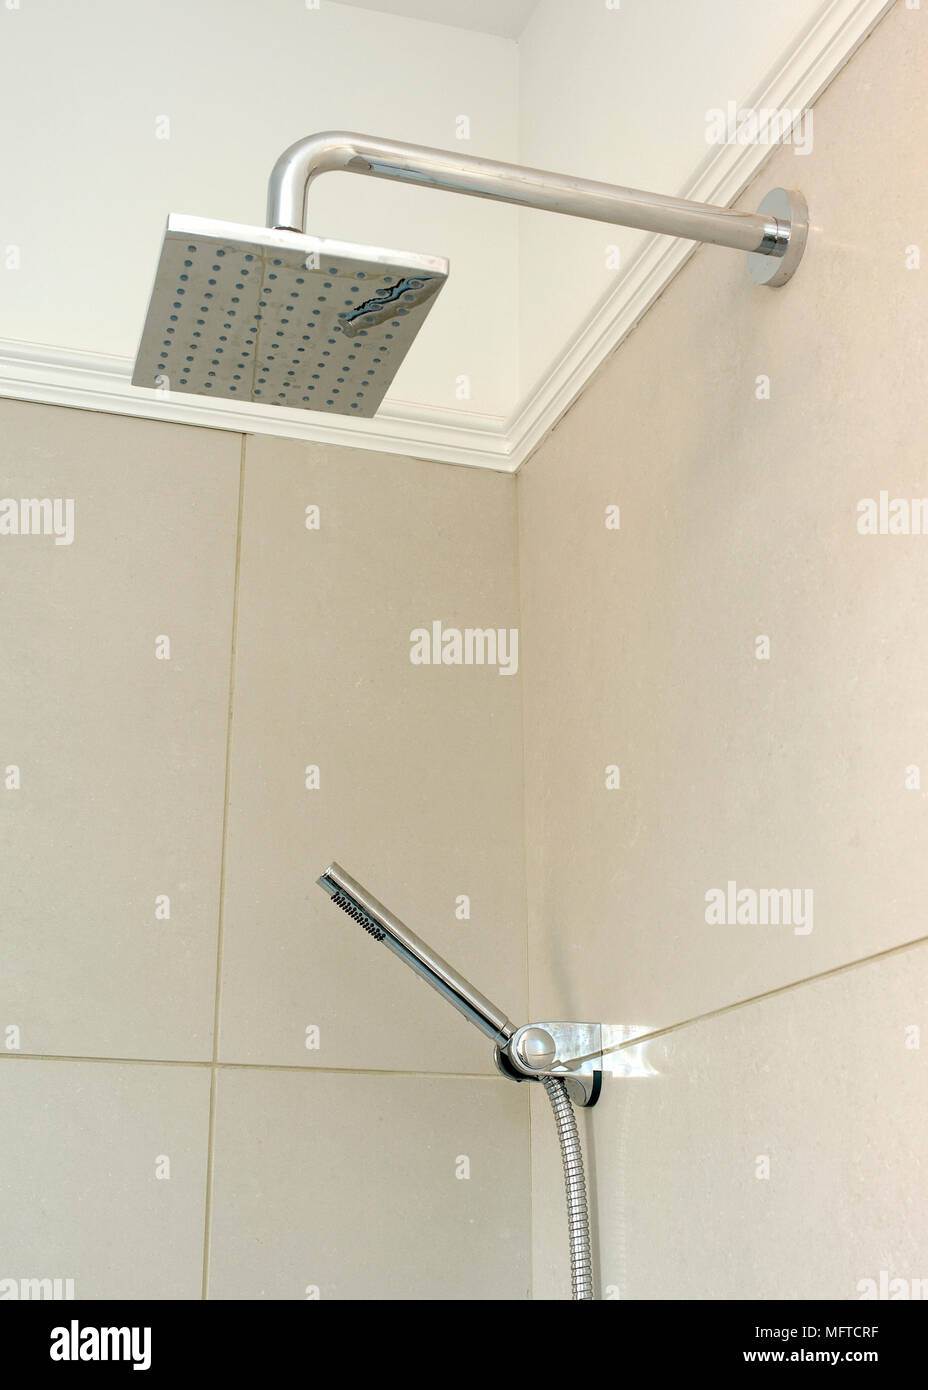 Shower tap fitting Stock Photo